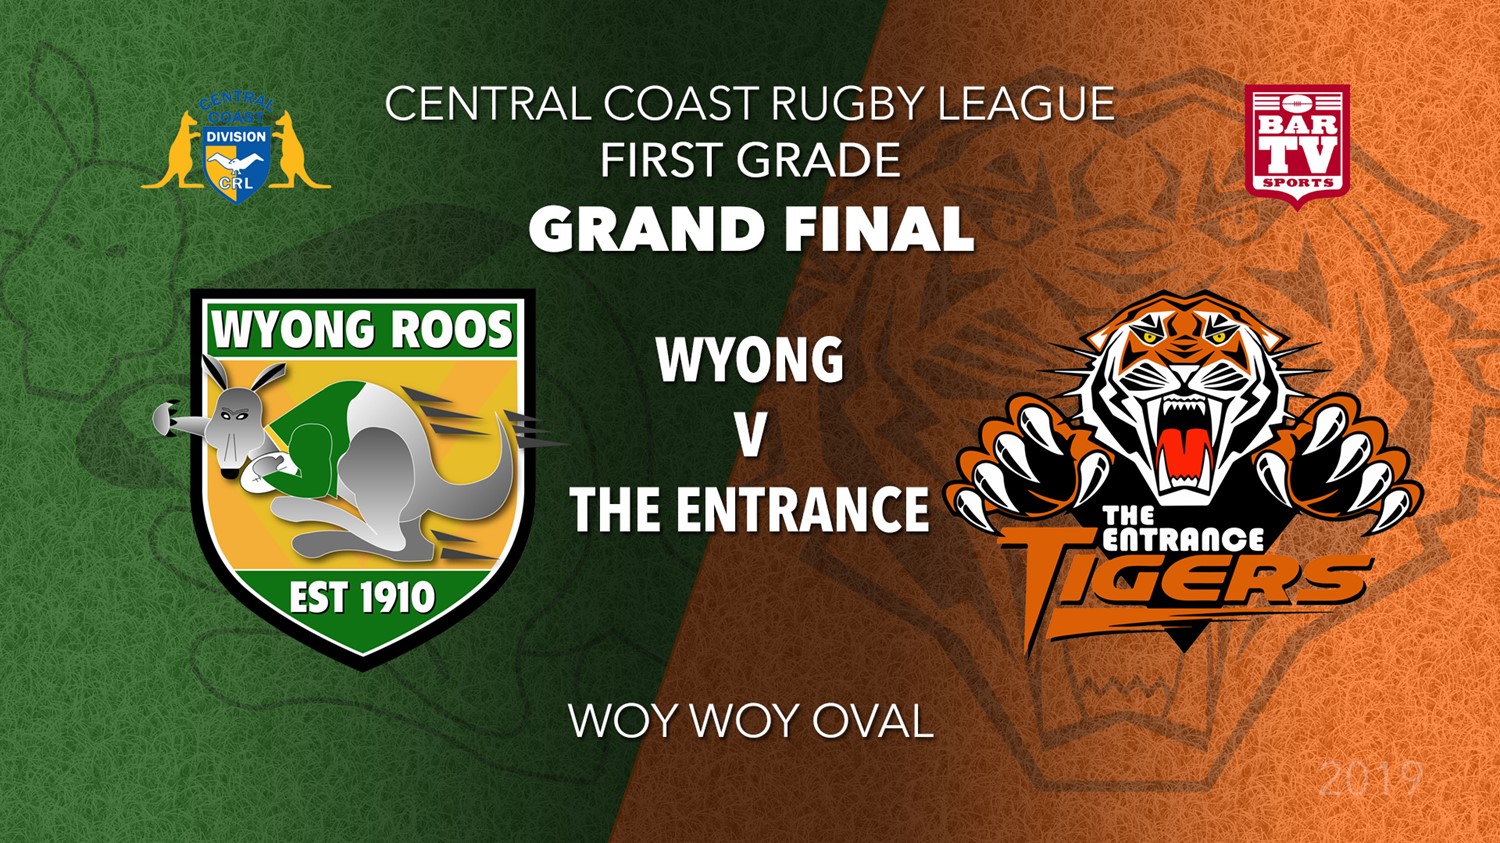 Central Coast Rugby League Grand Final - 1st Grade - Wyong Roos v The Entrance Tigers Minigame Slate Image